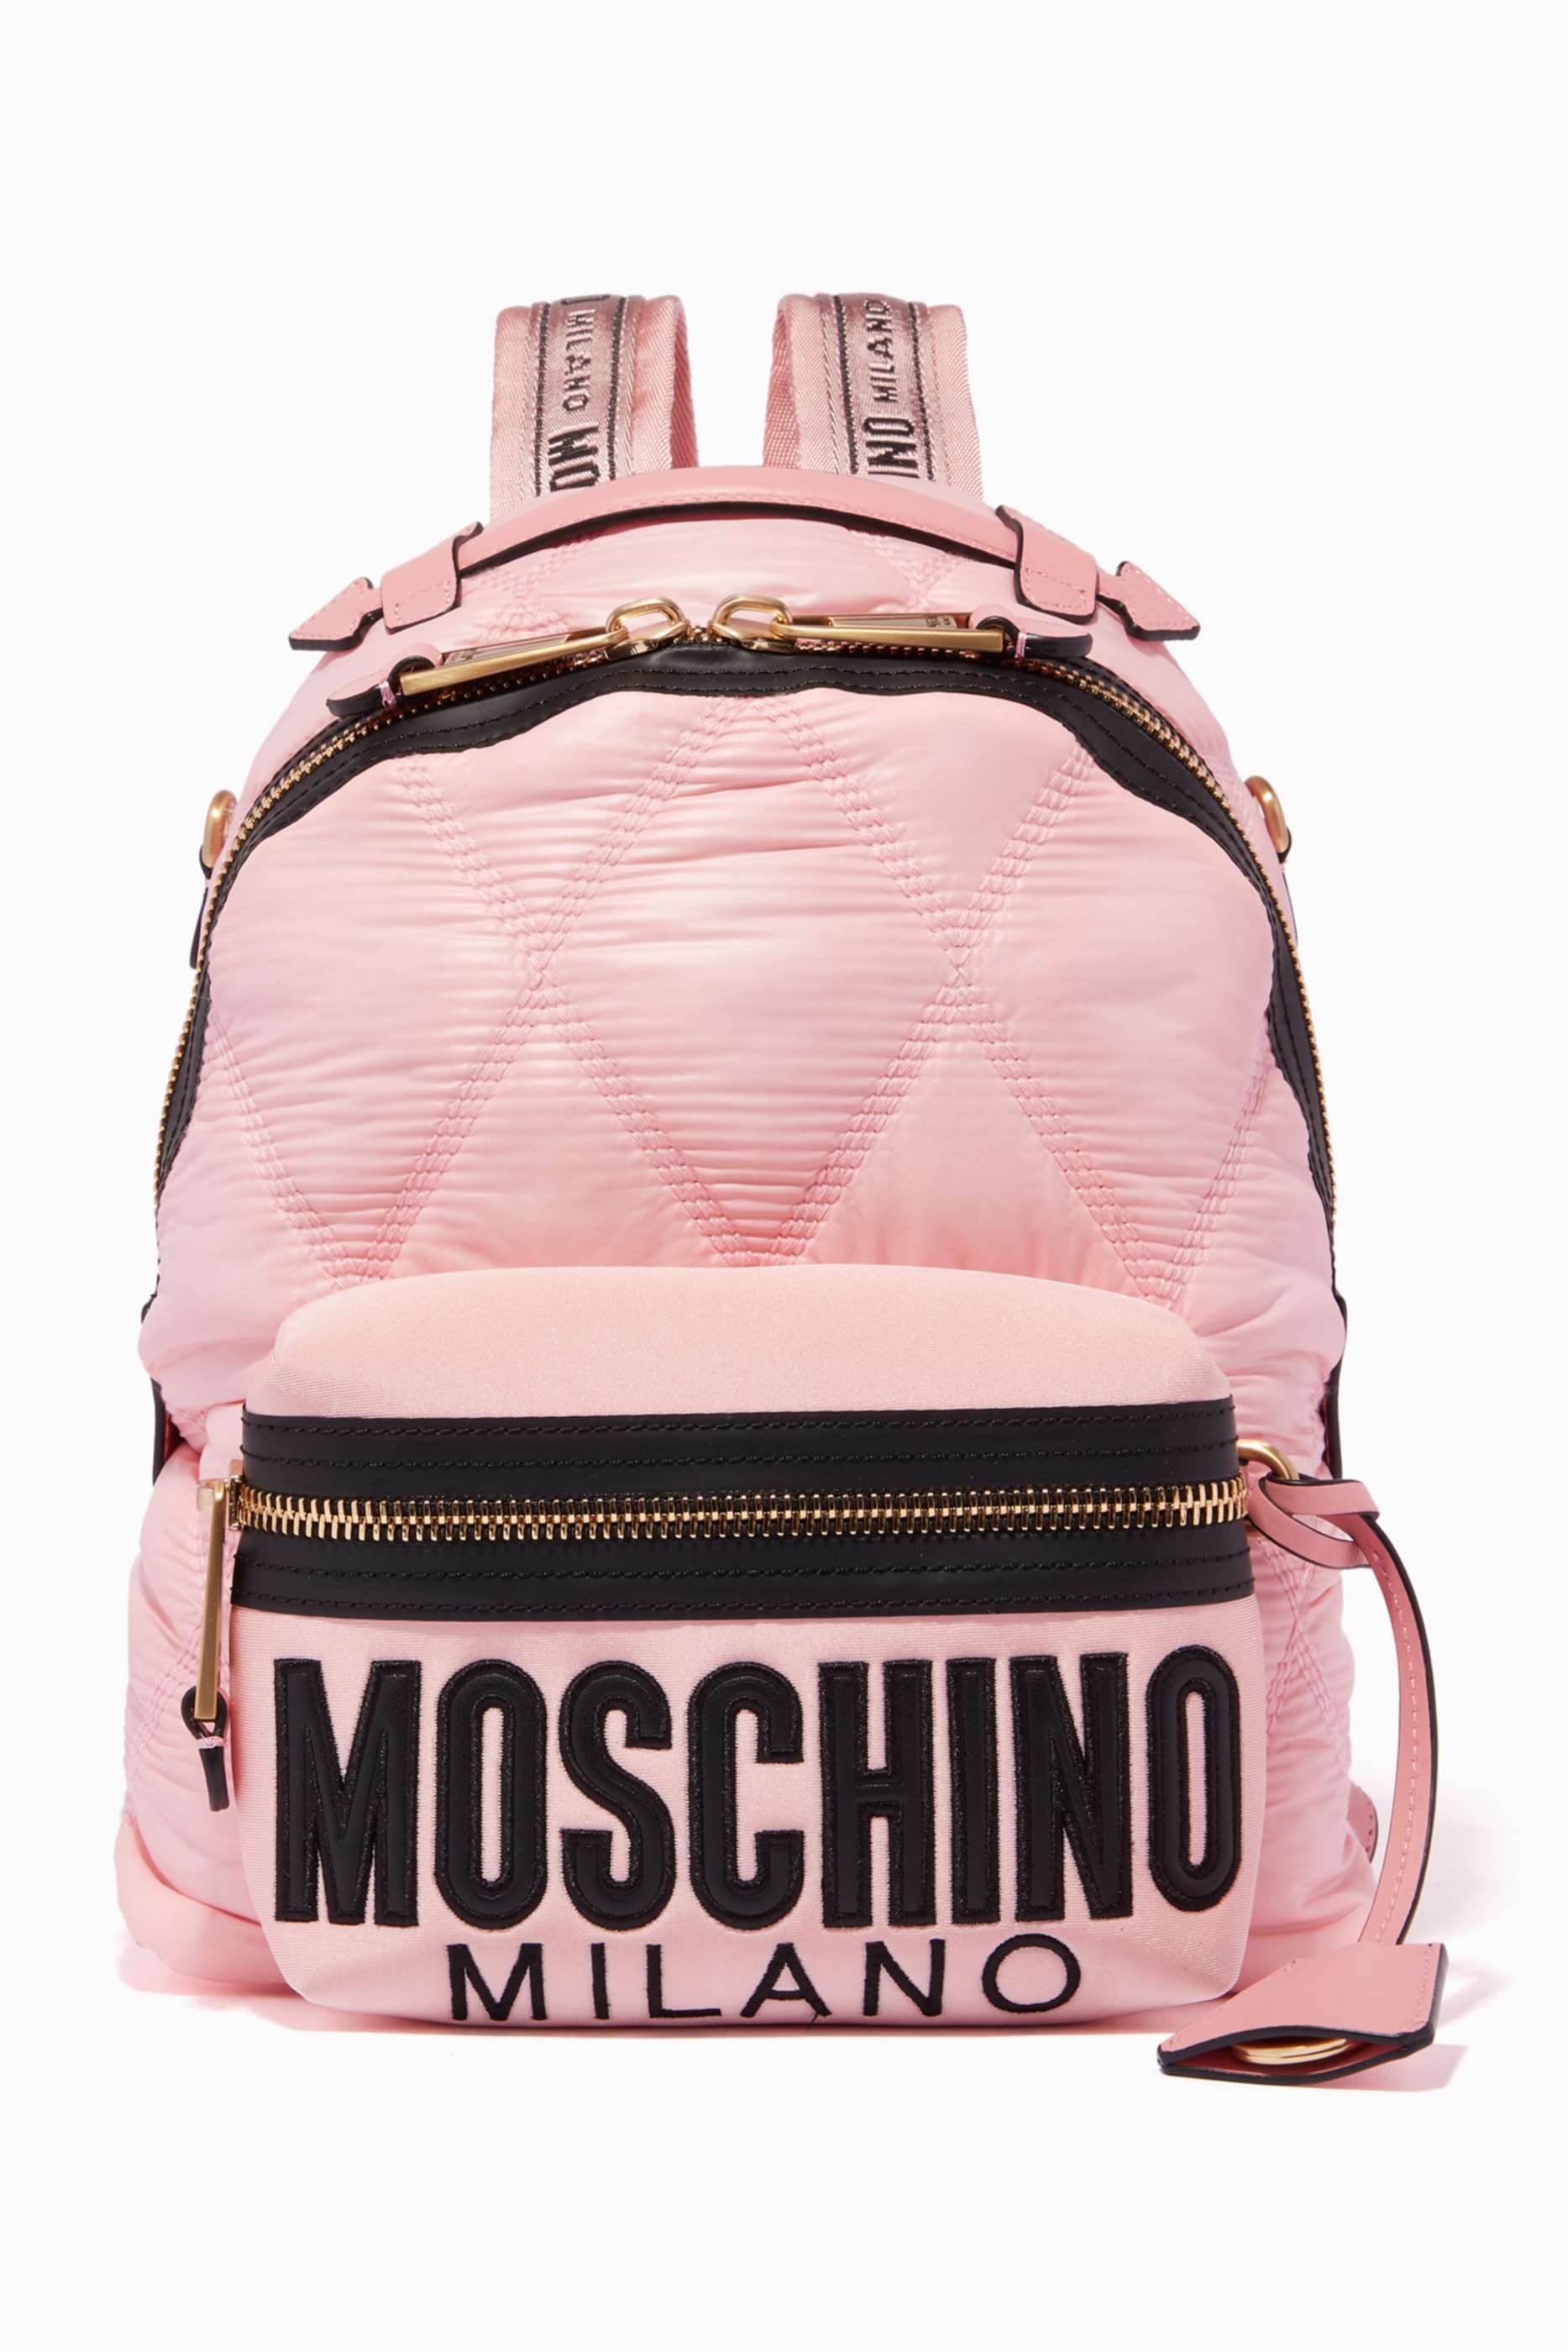 moschino pink backpack